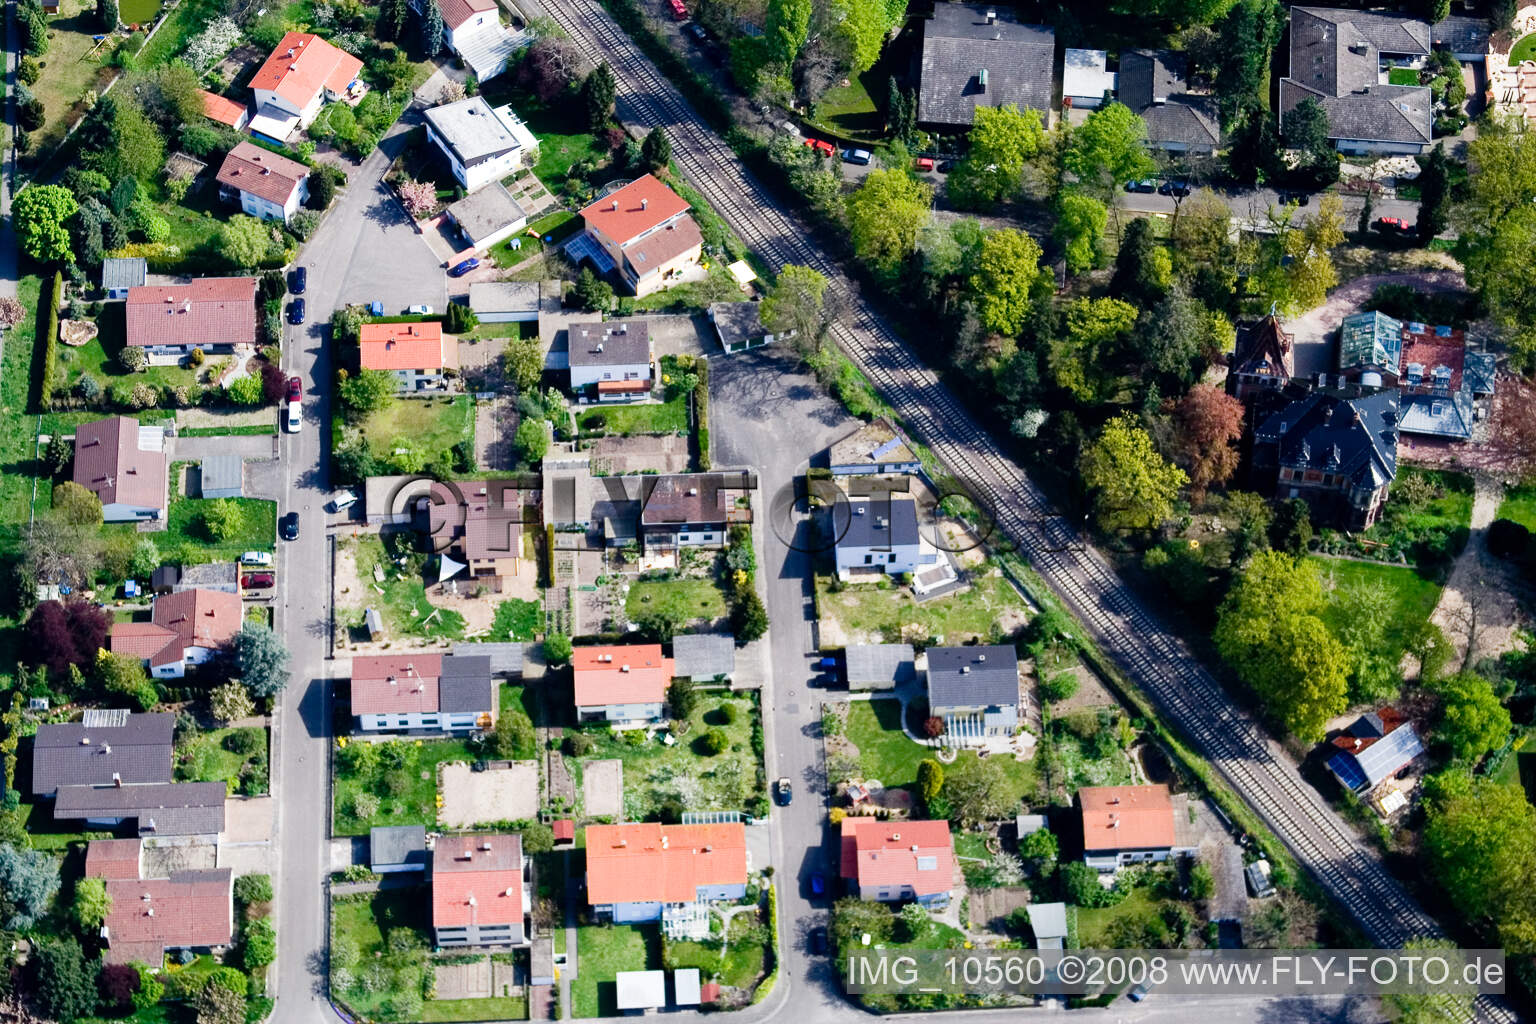 Aerial photograpy of Germersheimer Street in Jockgrim in the state Rhineland-Palatinate, Germany